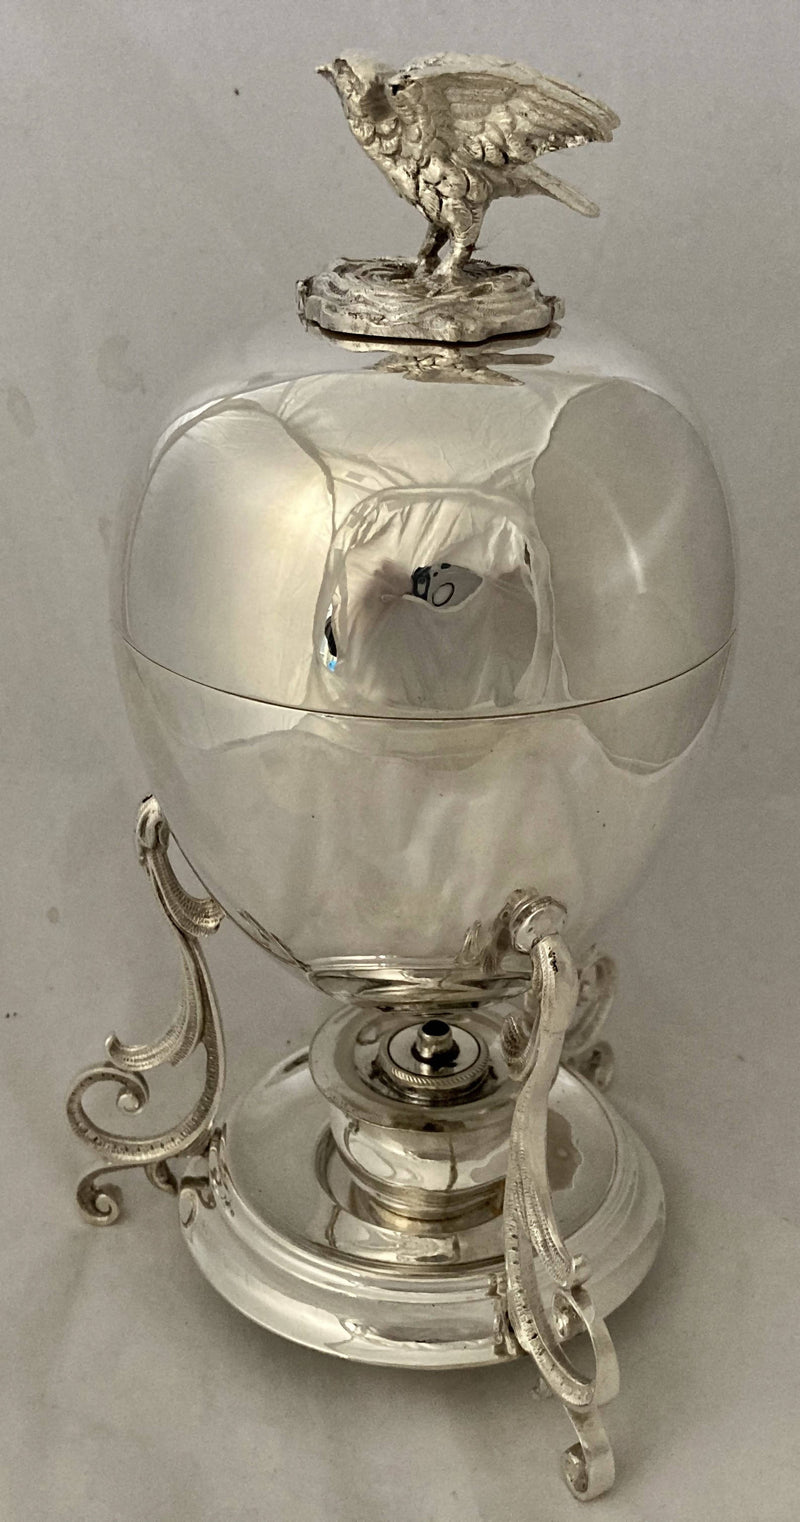 Silver Plated Egg Coddler with Bird & Nest Finial.